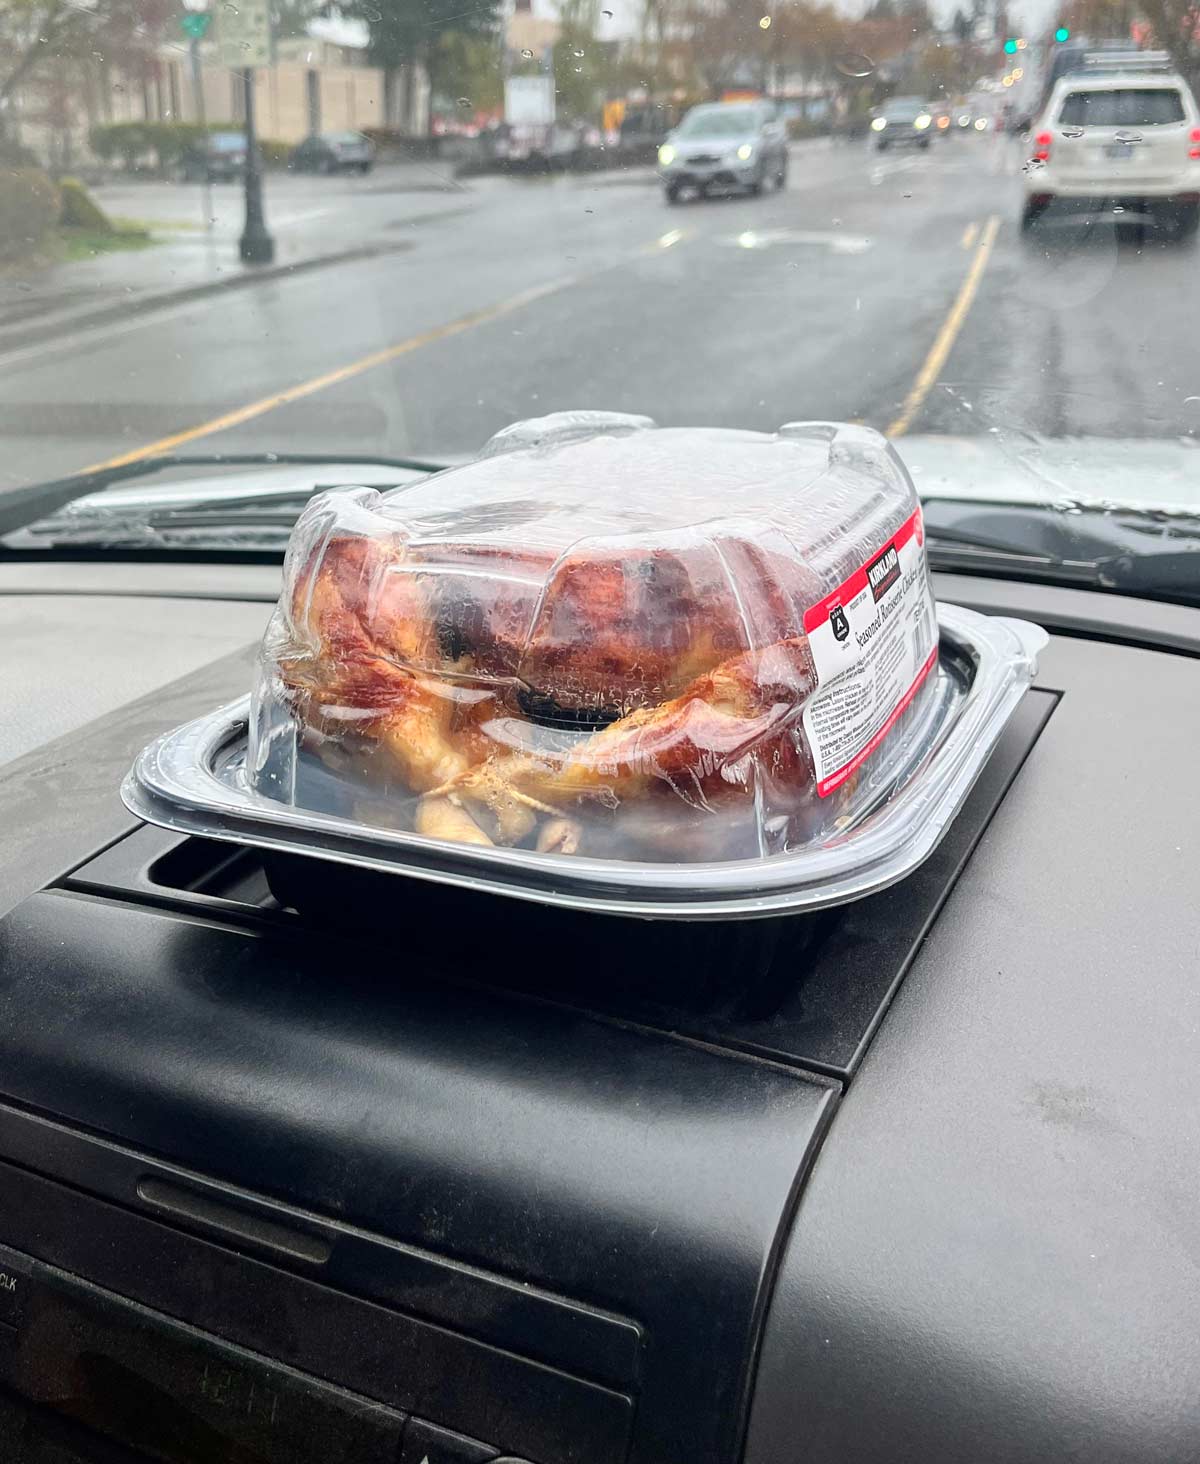 My truck was designed specifically to transport Costco rotisserie chicken safely